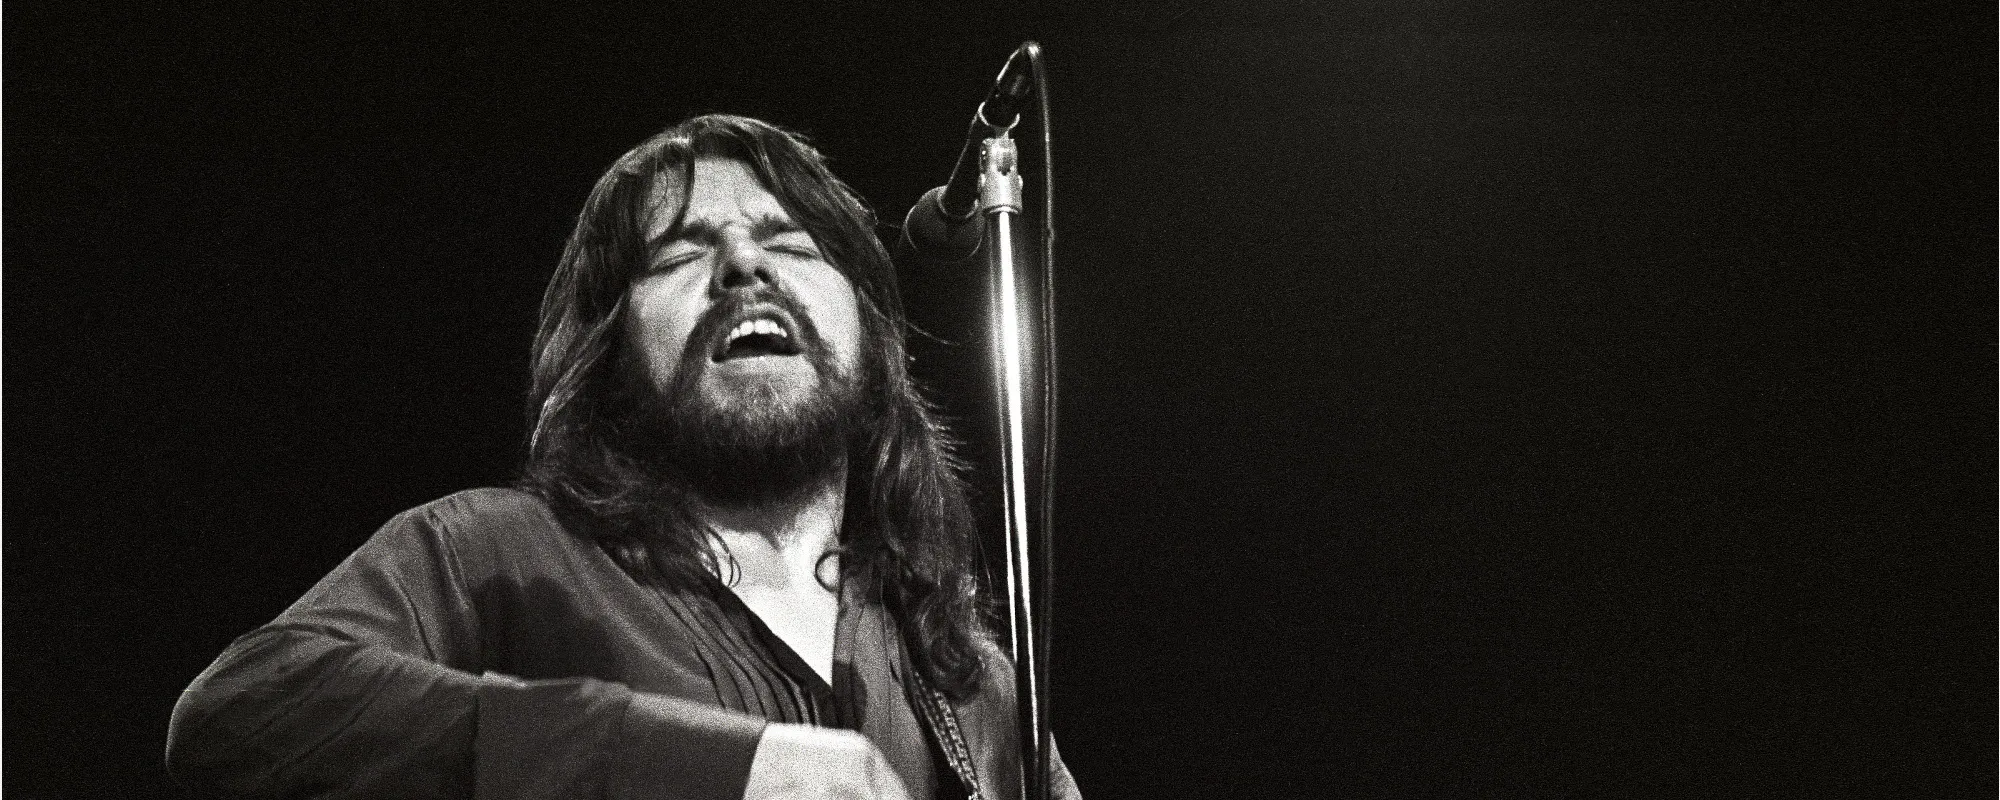 The Personal Meaning Behind”Like a Rock” by Bob Seger